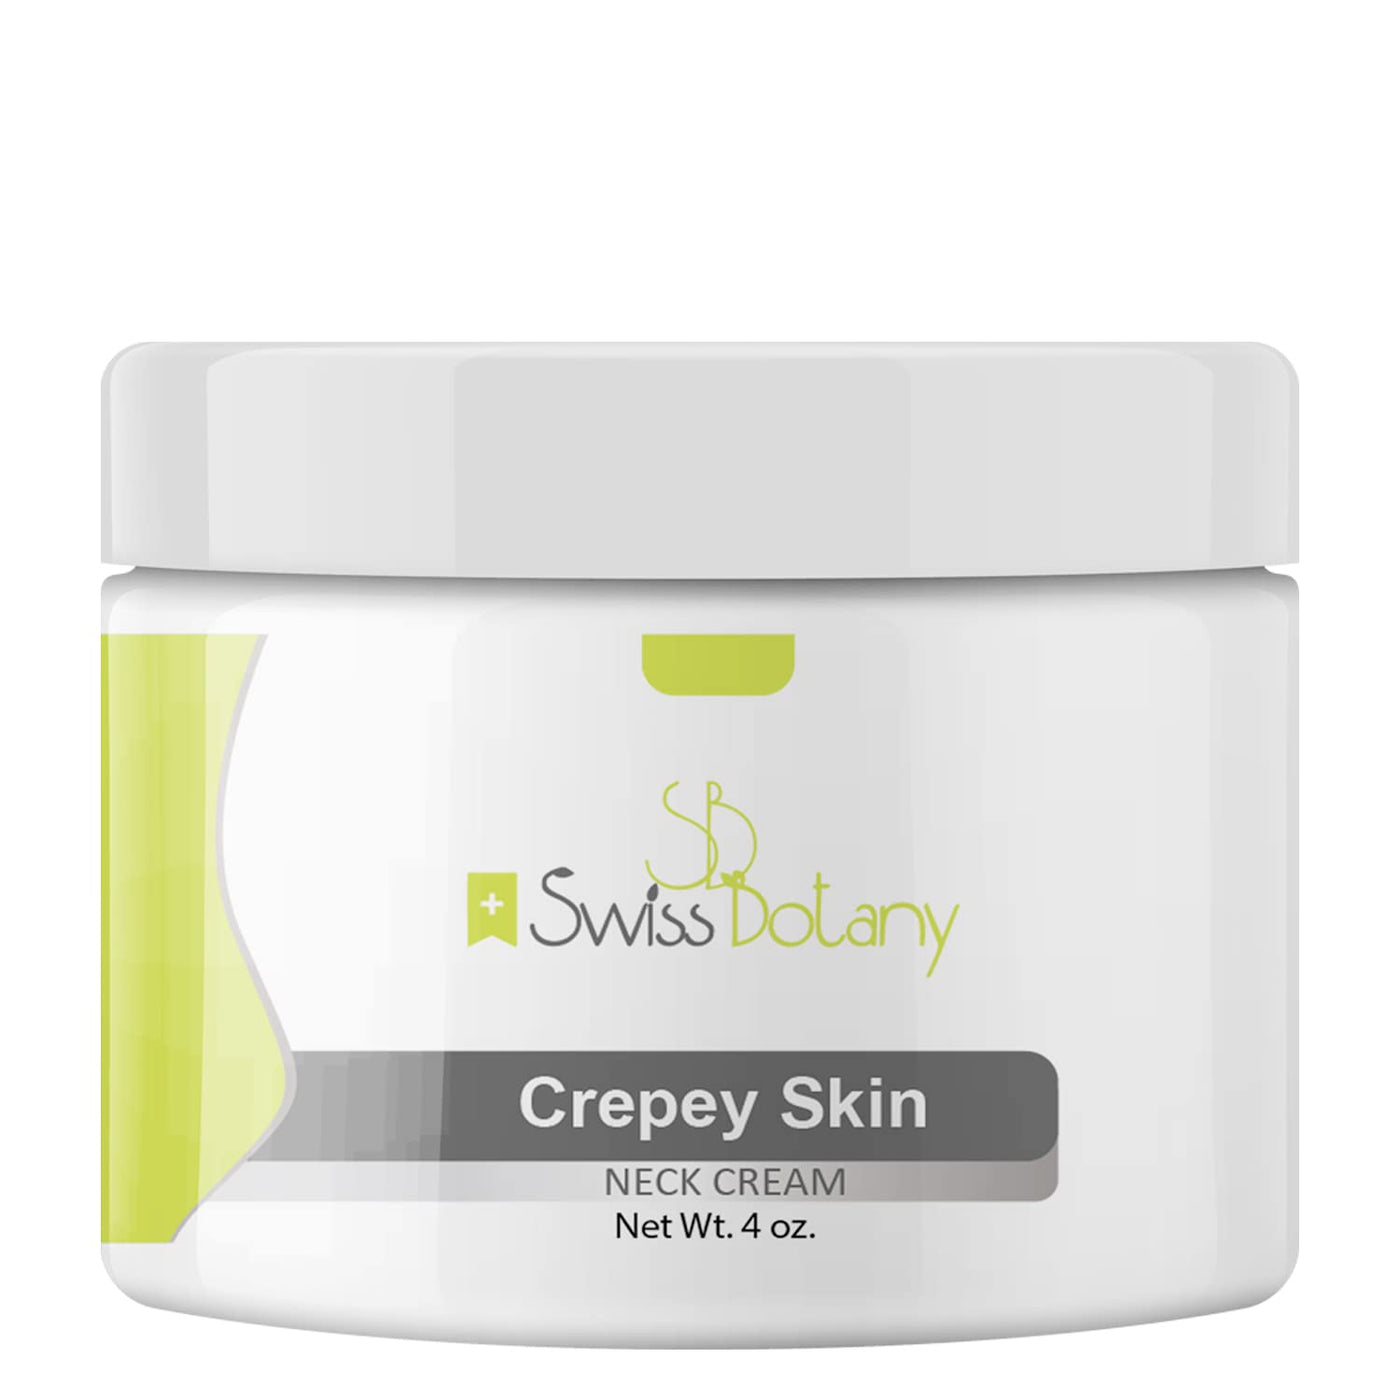 Crepey skin firming cream to repair crepey arms, neck, chest and